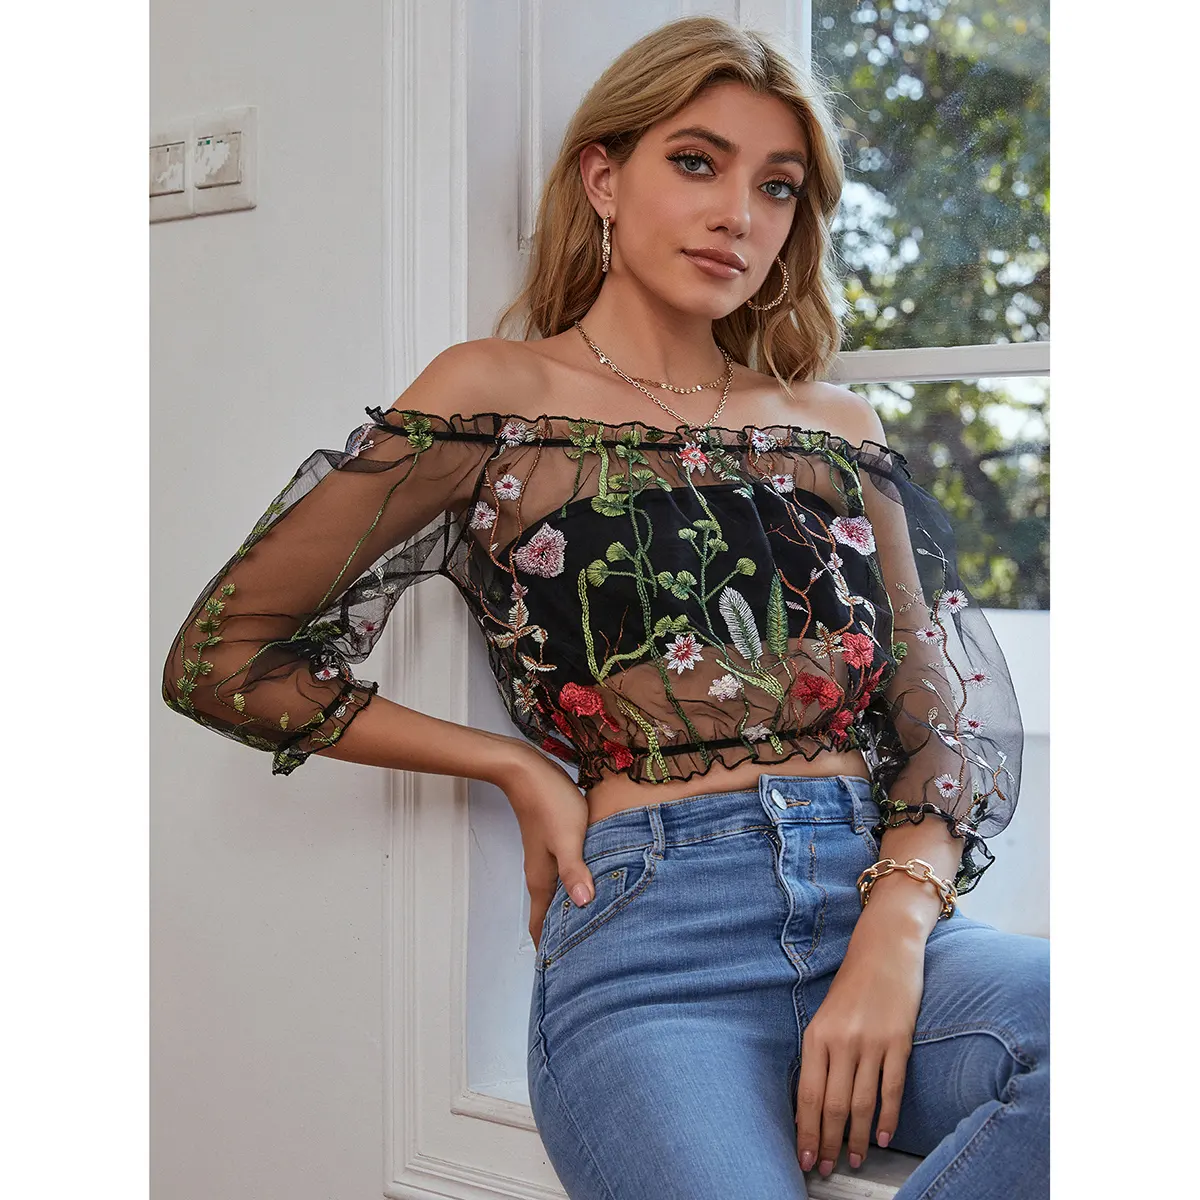 2020 Hot Sale Embroidery New Top Women Fashion Rose Mesh Design Sexy Transparent Top Women